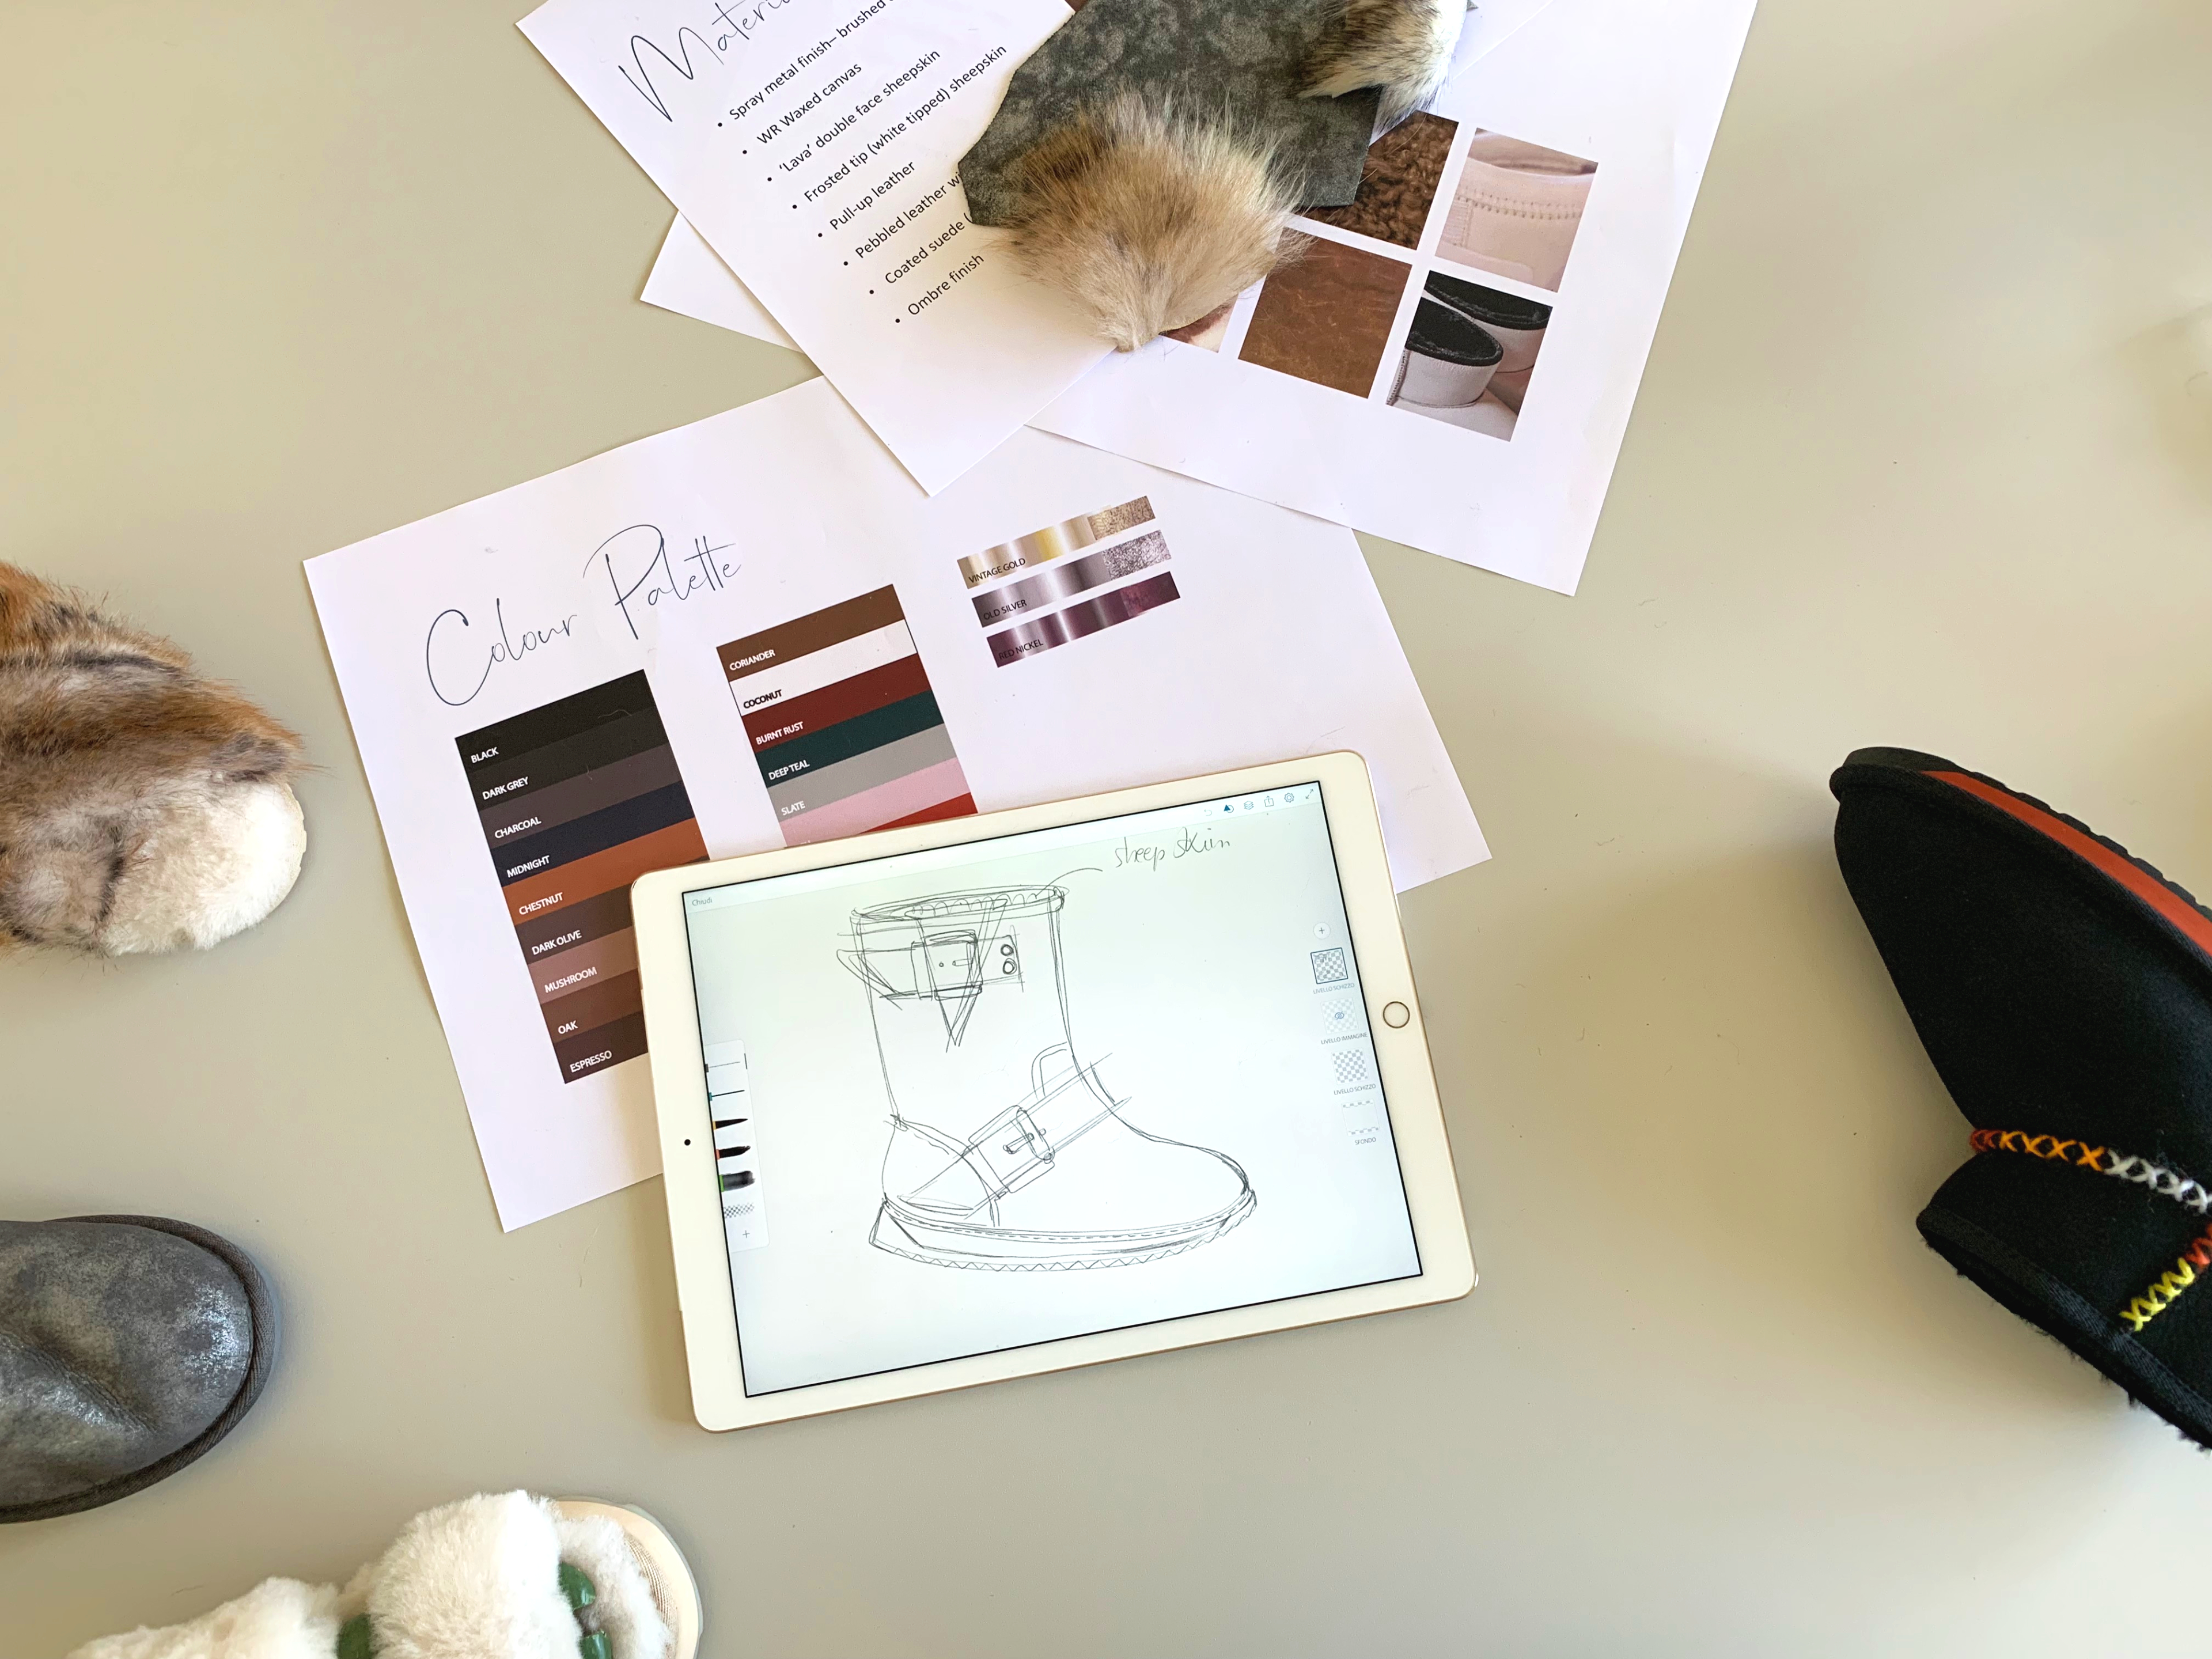 Sketch of EMU waterproof boot on iPad laying on table with pieces of paper with notes, colour palette, slippers and materials